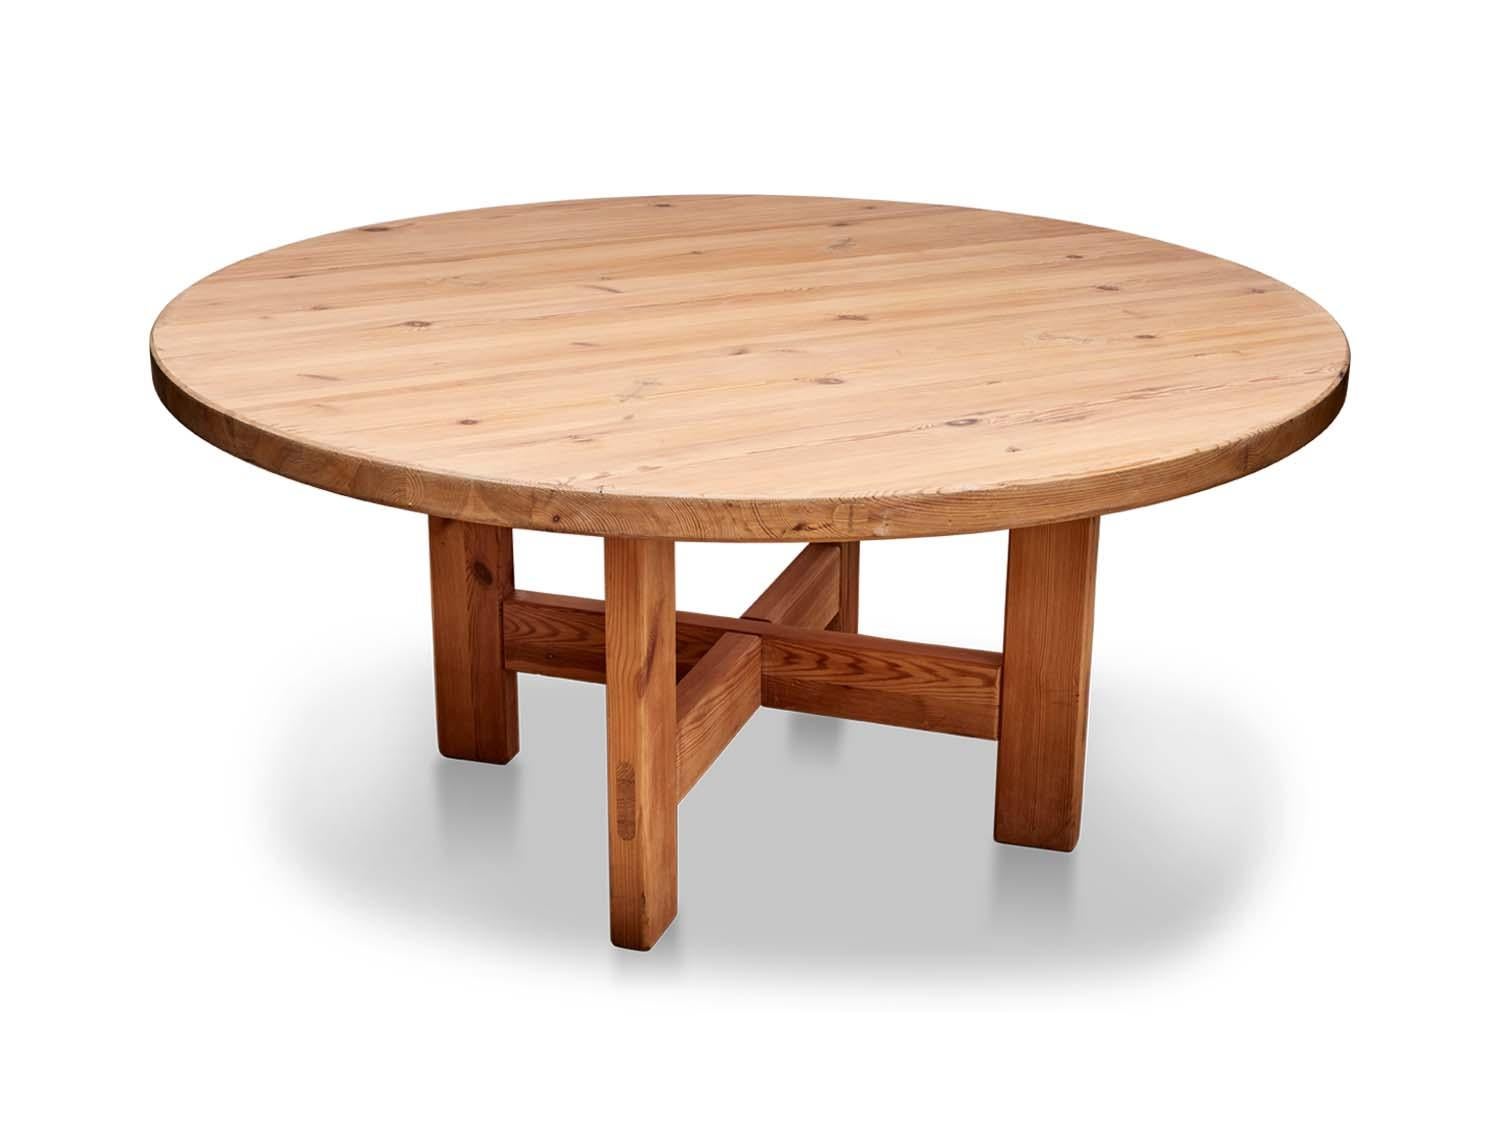 Solid pine dining table by Roland Wilhemsson for Karl Anderson & Soner.